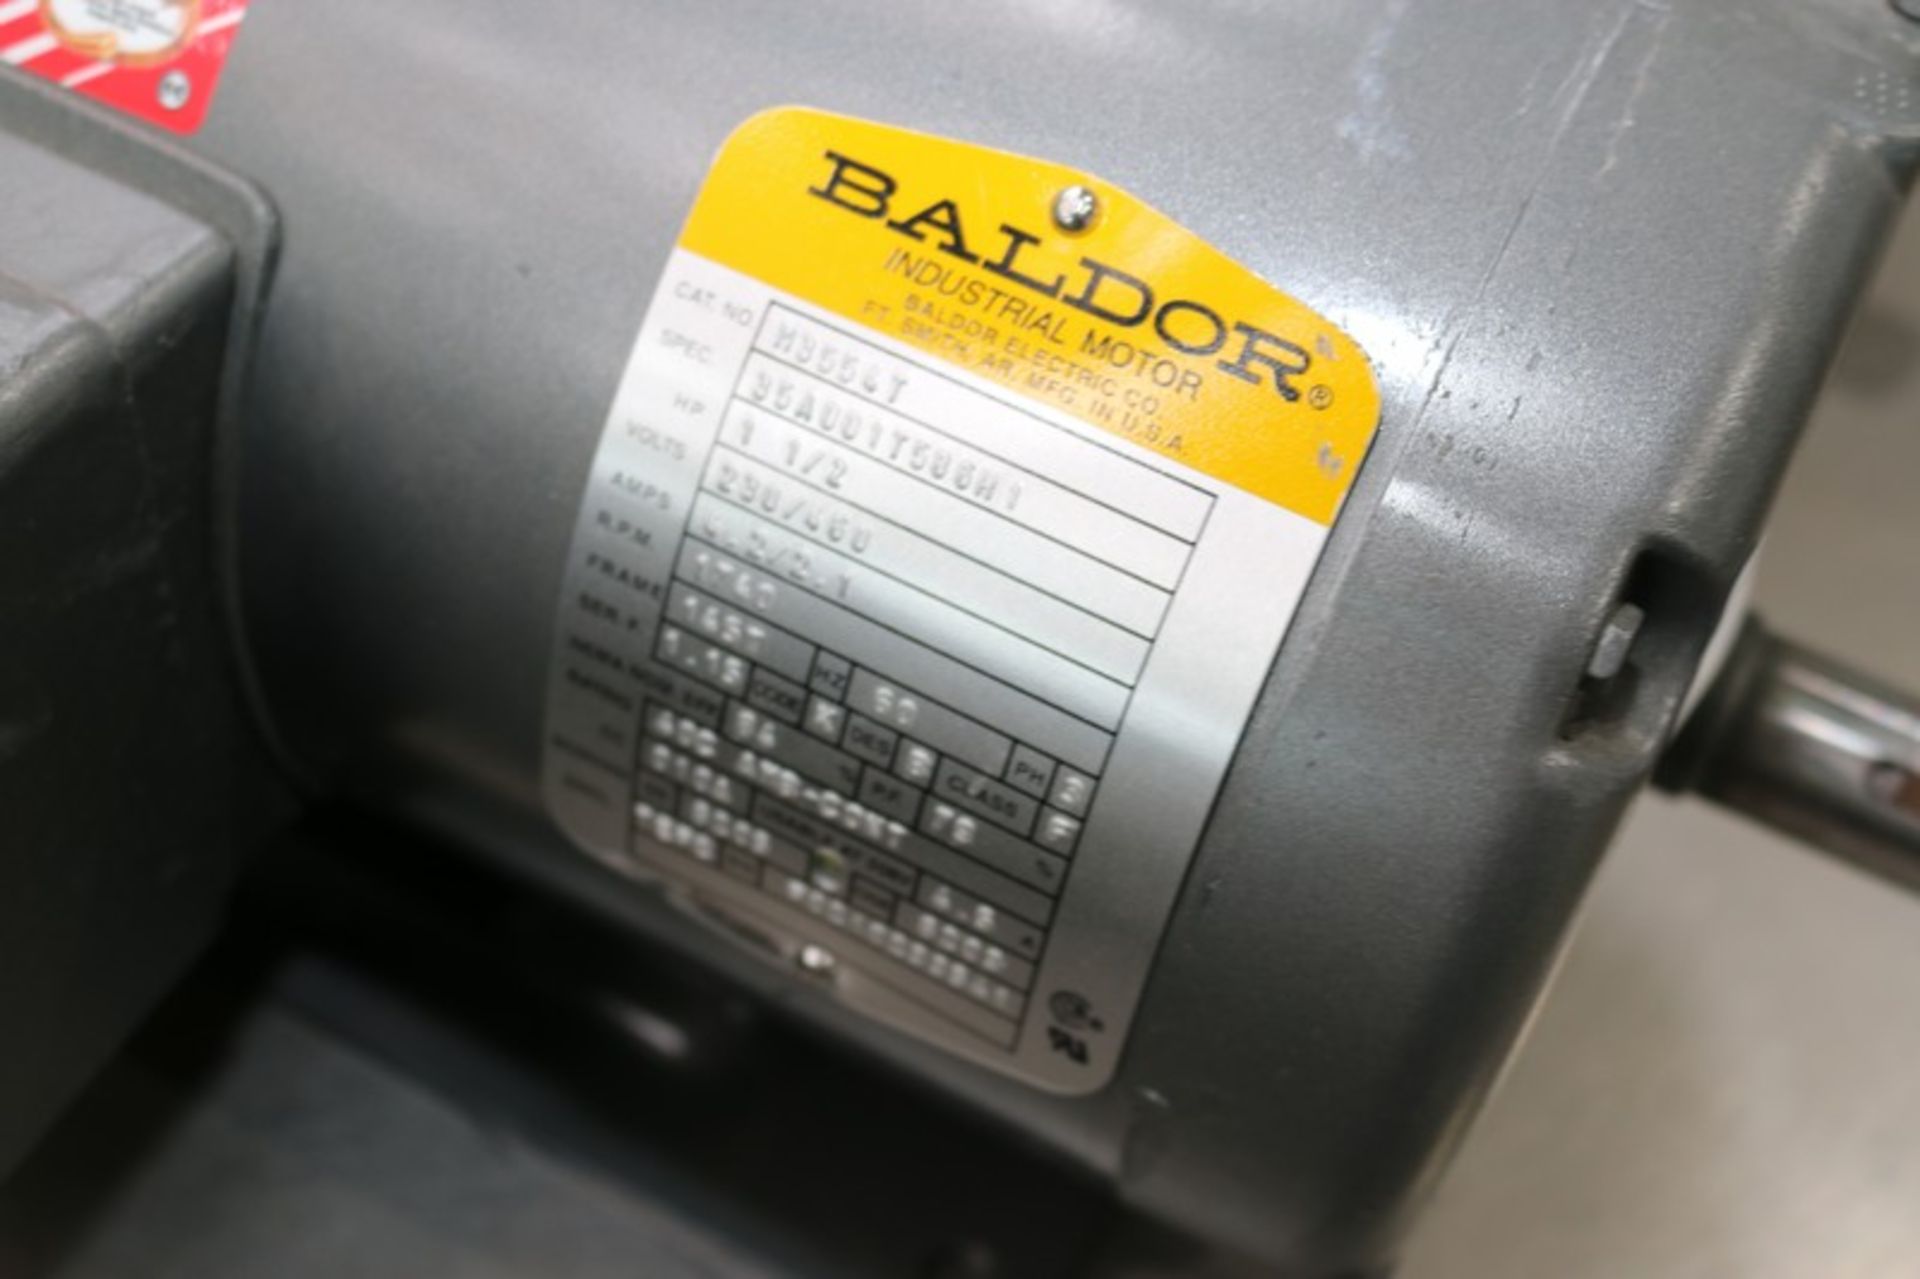 (2) NEW Baldor 1-1/2 hp Motors, 230/460 Volts, 3 Phase, 1740 RPM (INV#81041)(Located @ the MDG - Image 4 of 5